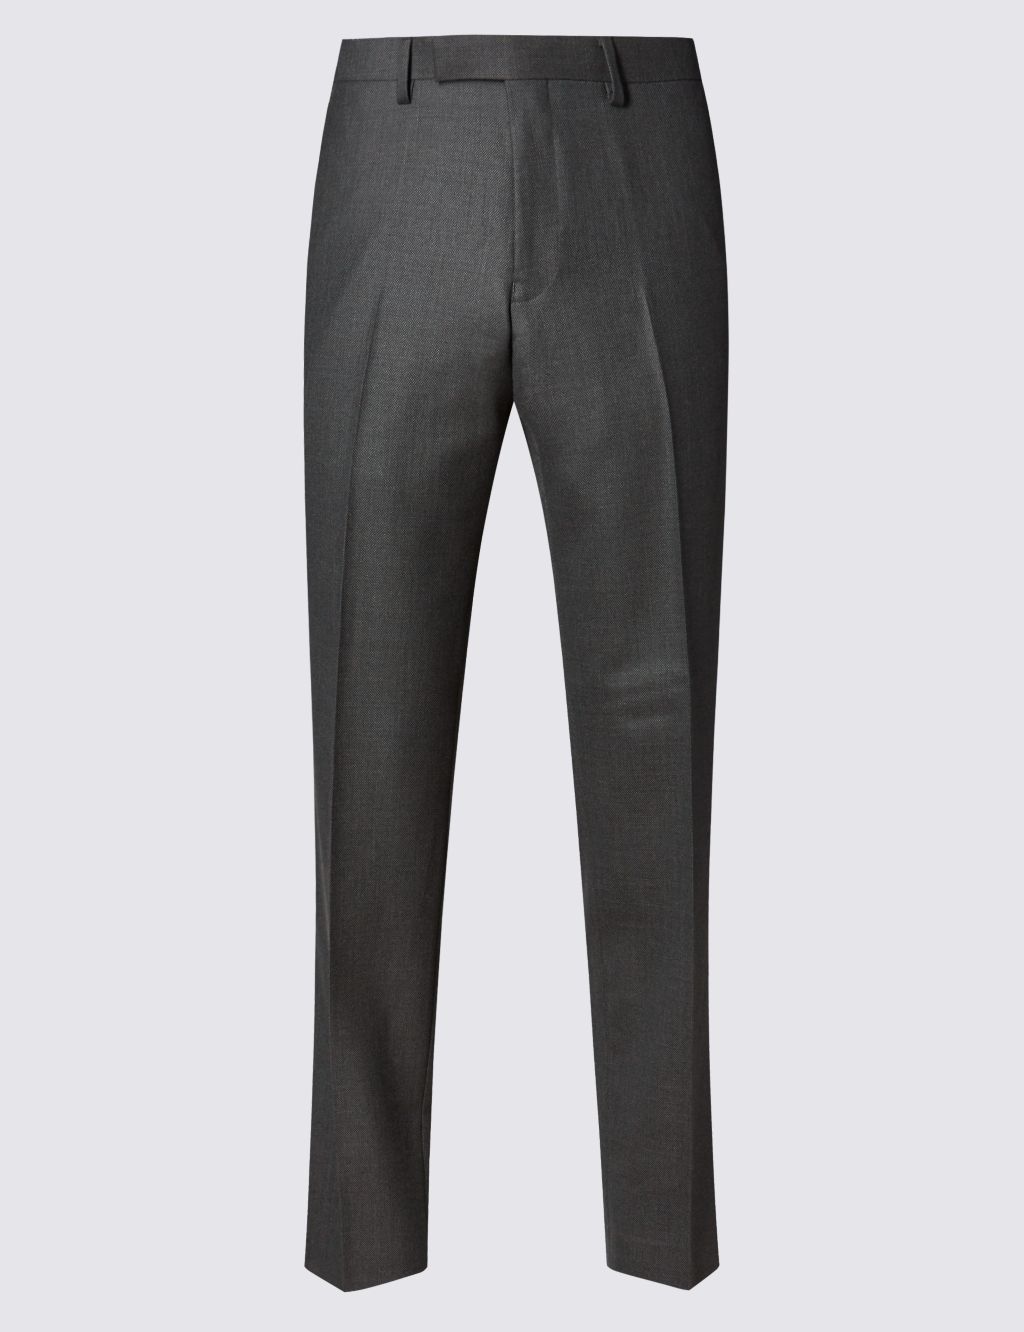 Charcoal Tailored Fit Wool Trousers 1 of 4